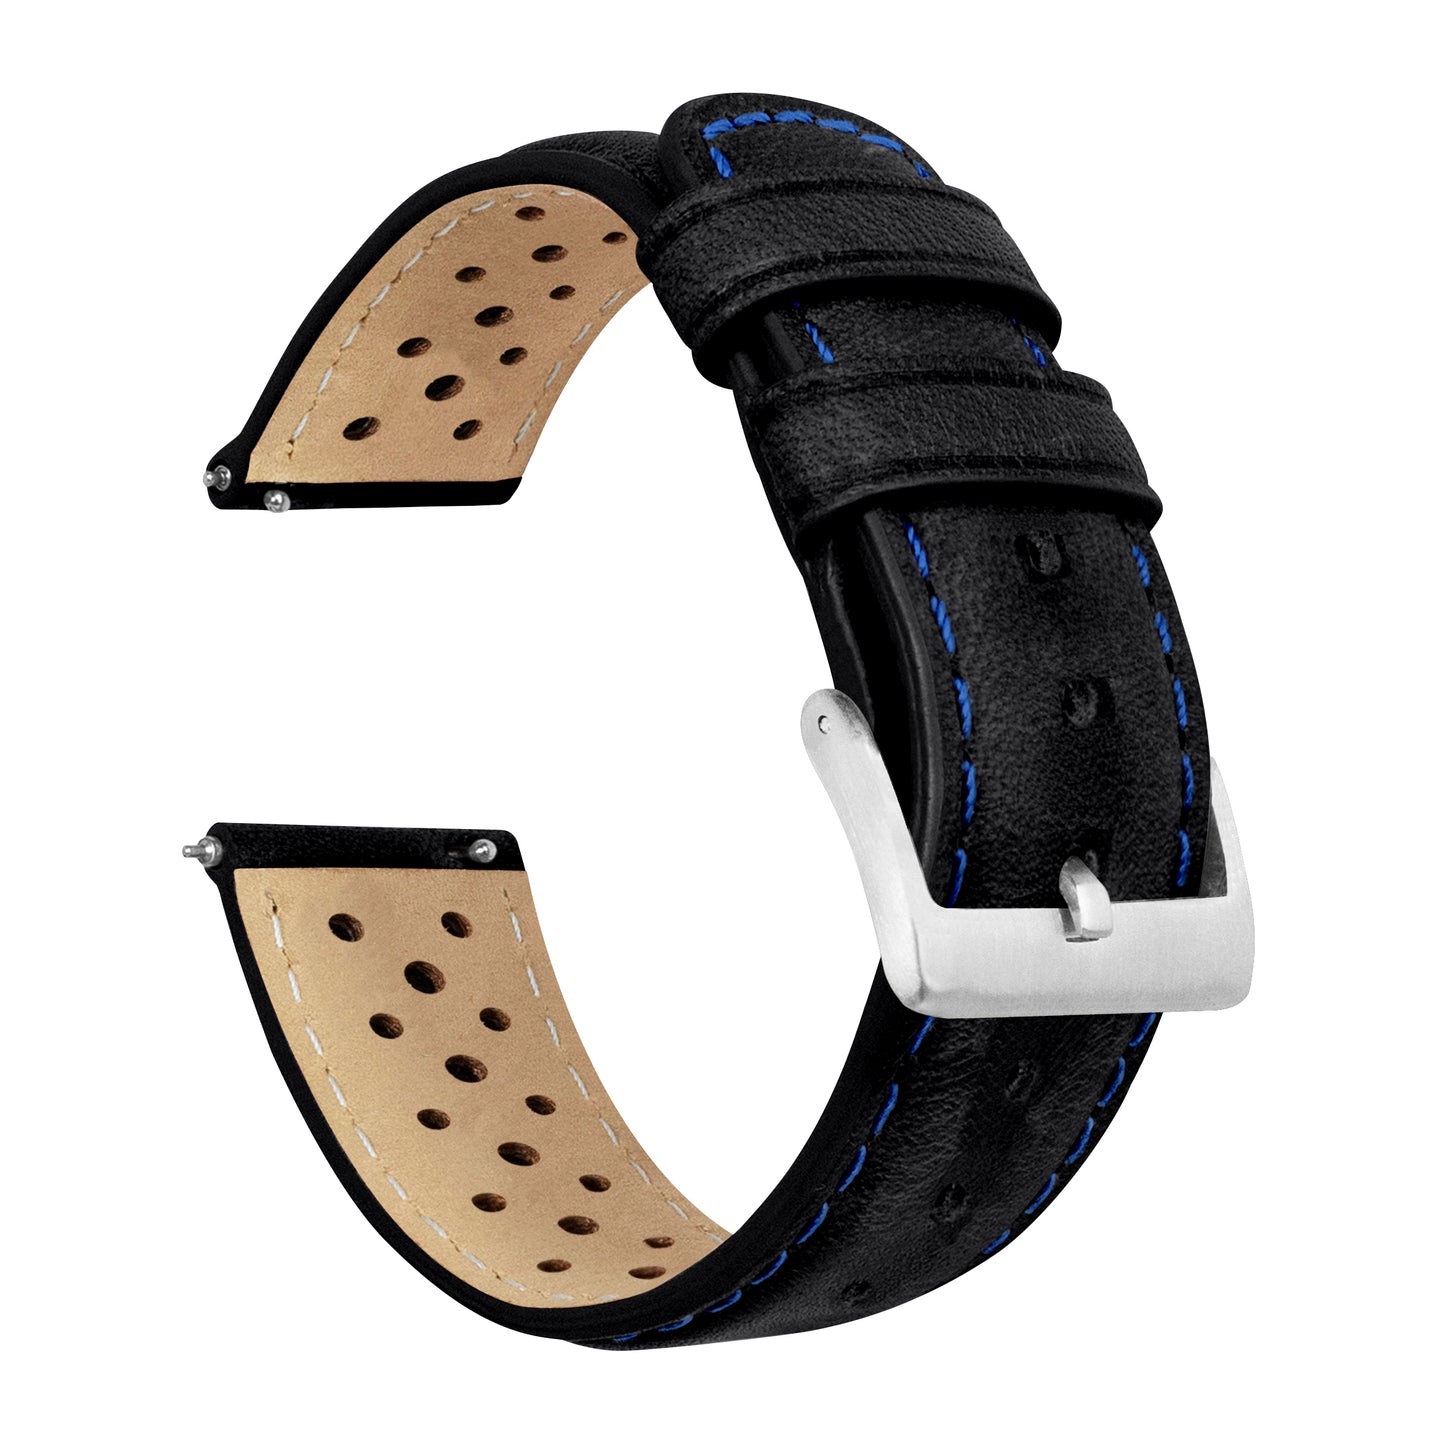 Samsung Galaxy Watch Active 2 Racing Horween Leather Black Blue Stitch Watch Band